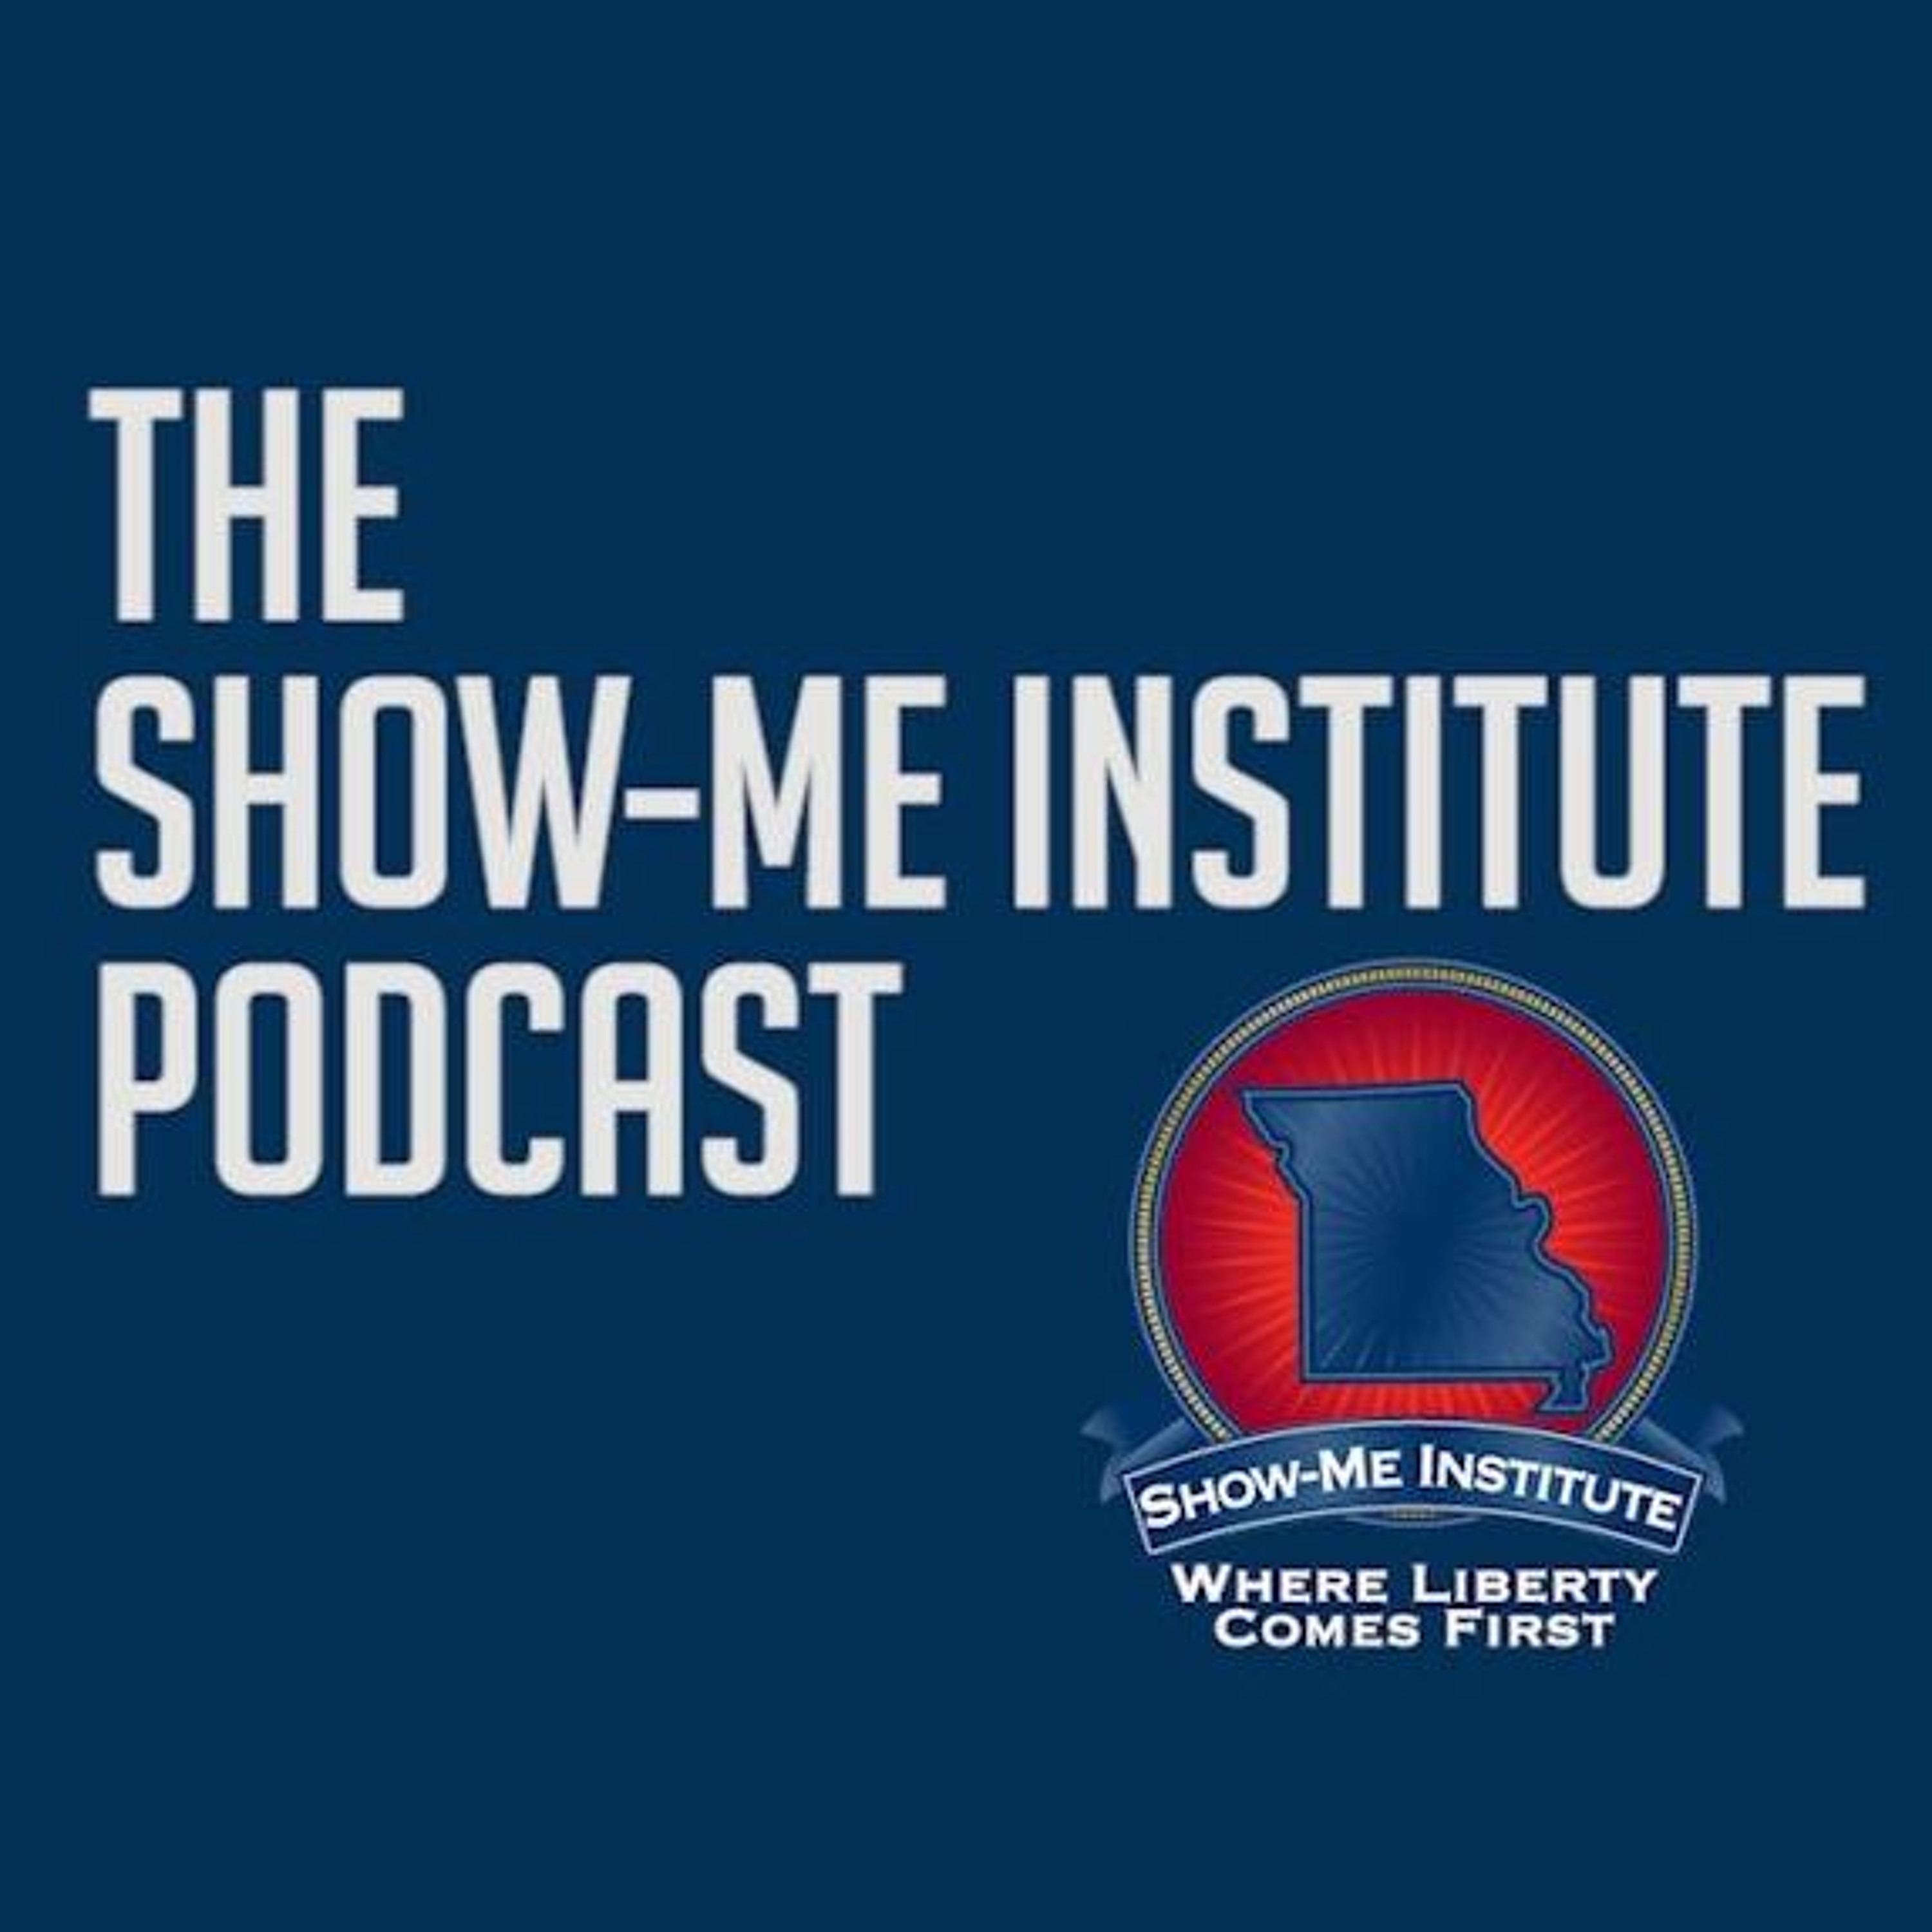 SMI Podcast: Transparency for Some